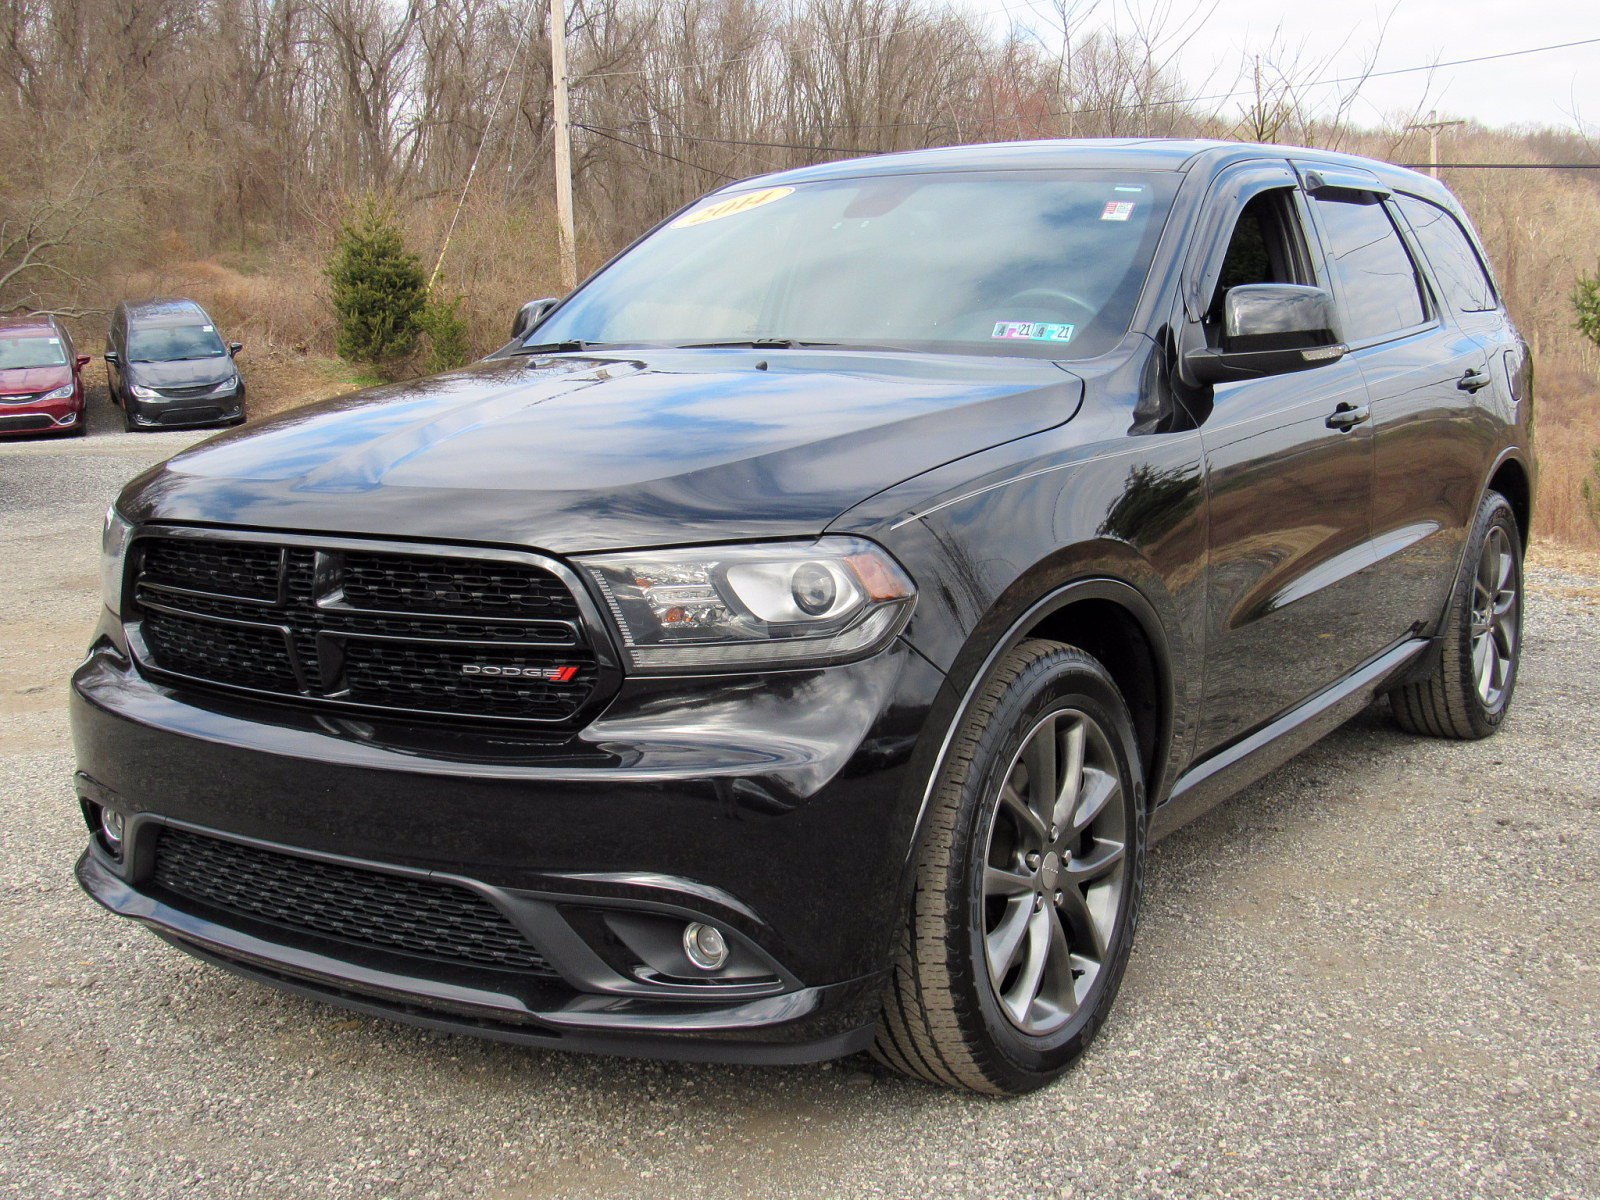 Pre-Owned 2014 Dodge Durango R/T Sport Utility in Newtown Square #P3034 ...